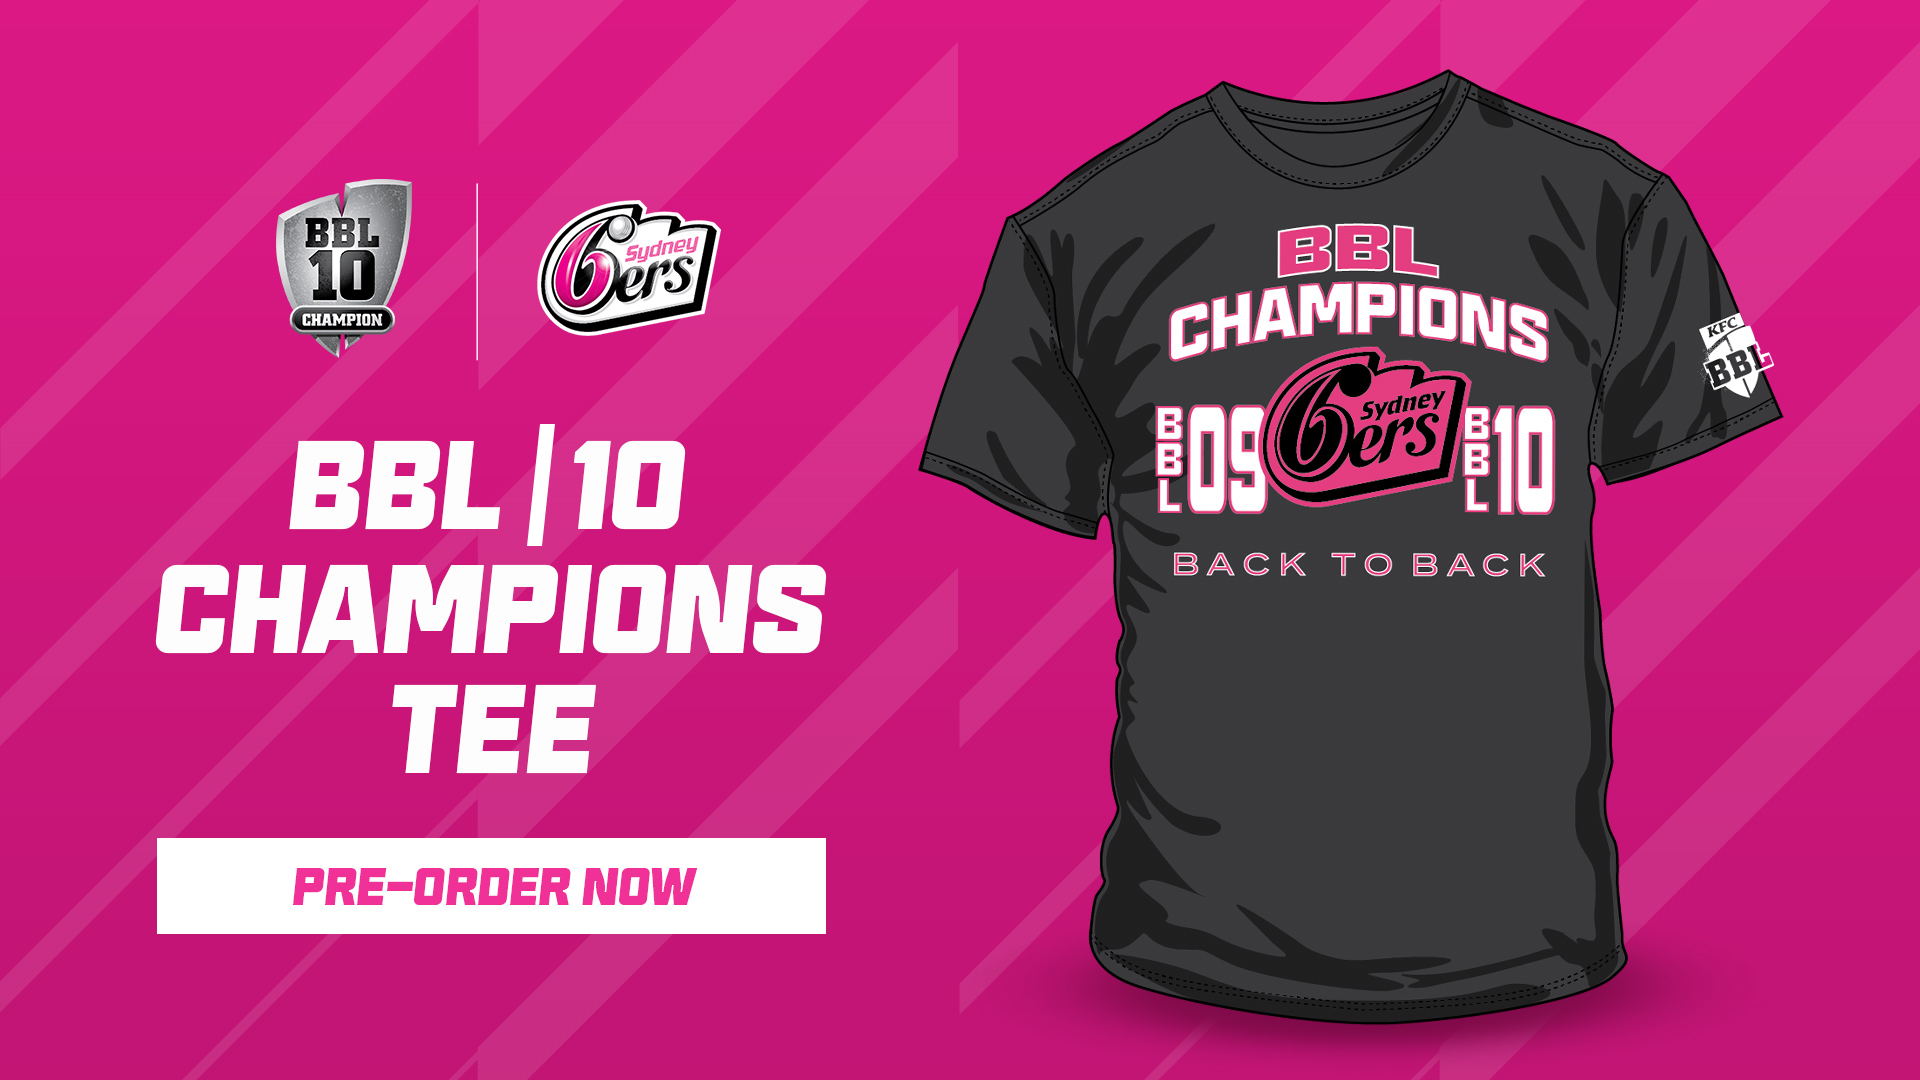 Kfc Big Bash League Dress Like A Champion If Last Year Is Anything To Go By These Shirts Will Sell Quick T Co Yje8nlvbmv T Co Qvgmjexjhs Twitter